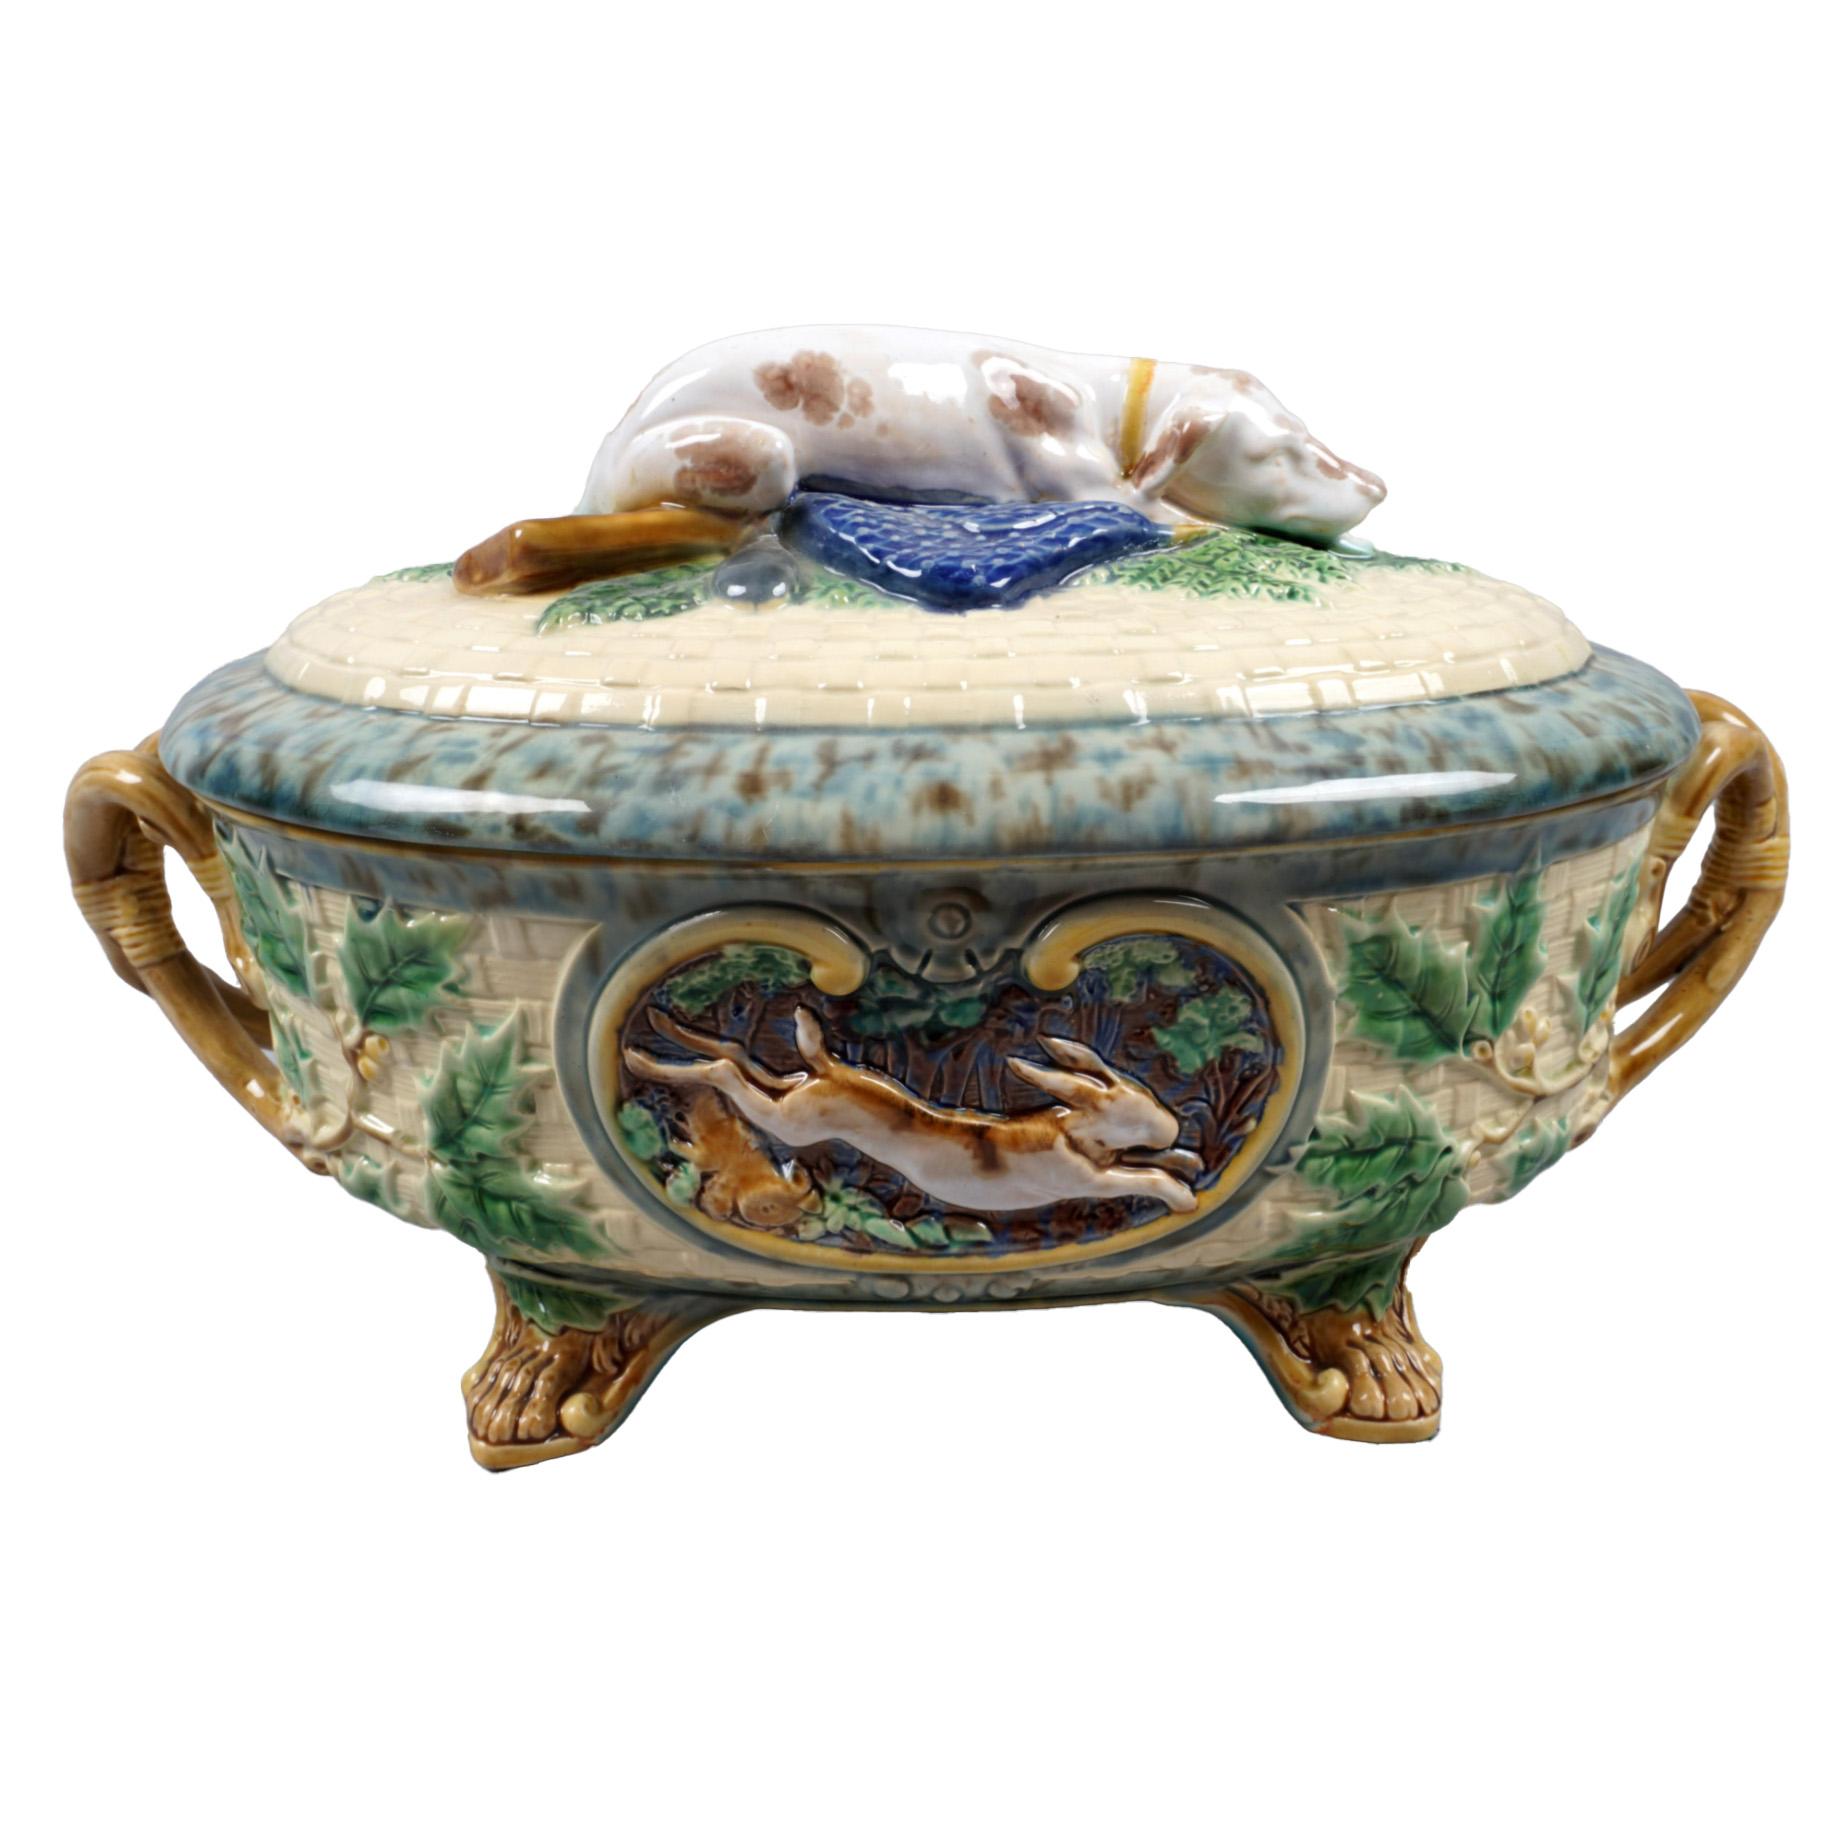 This late 19th-century Minton majolica game pie tureen and cover offer a glimpse into the richness of Victorian dining. The cover features a meticulously molded hunting dog nestled amidst ferns, evoking scenes of countryside pursuits. The